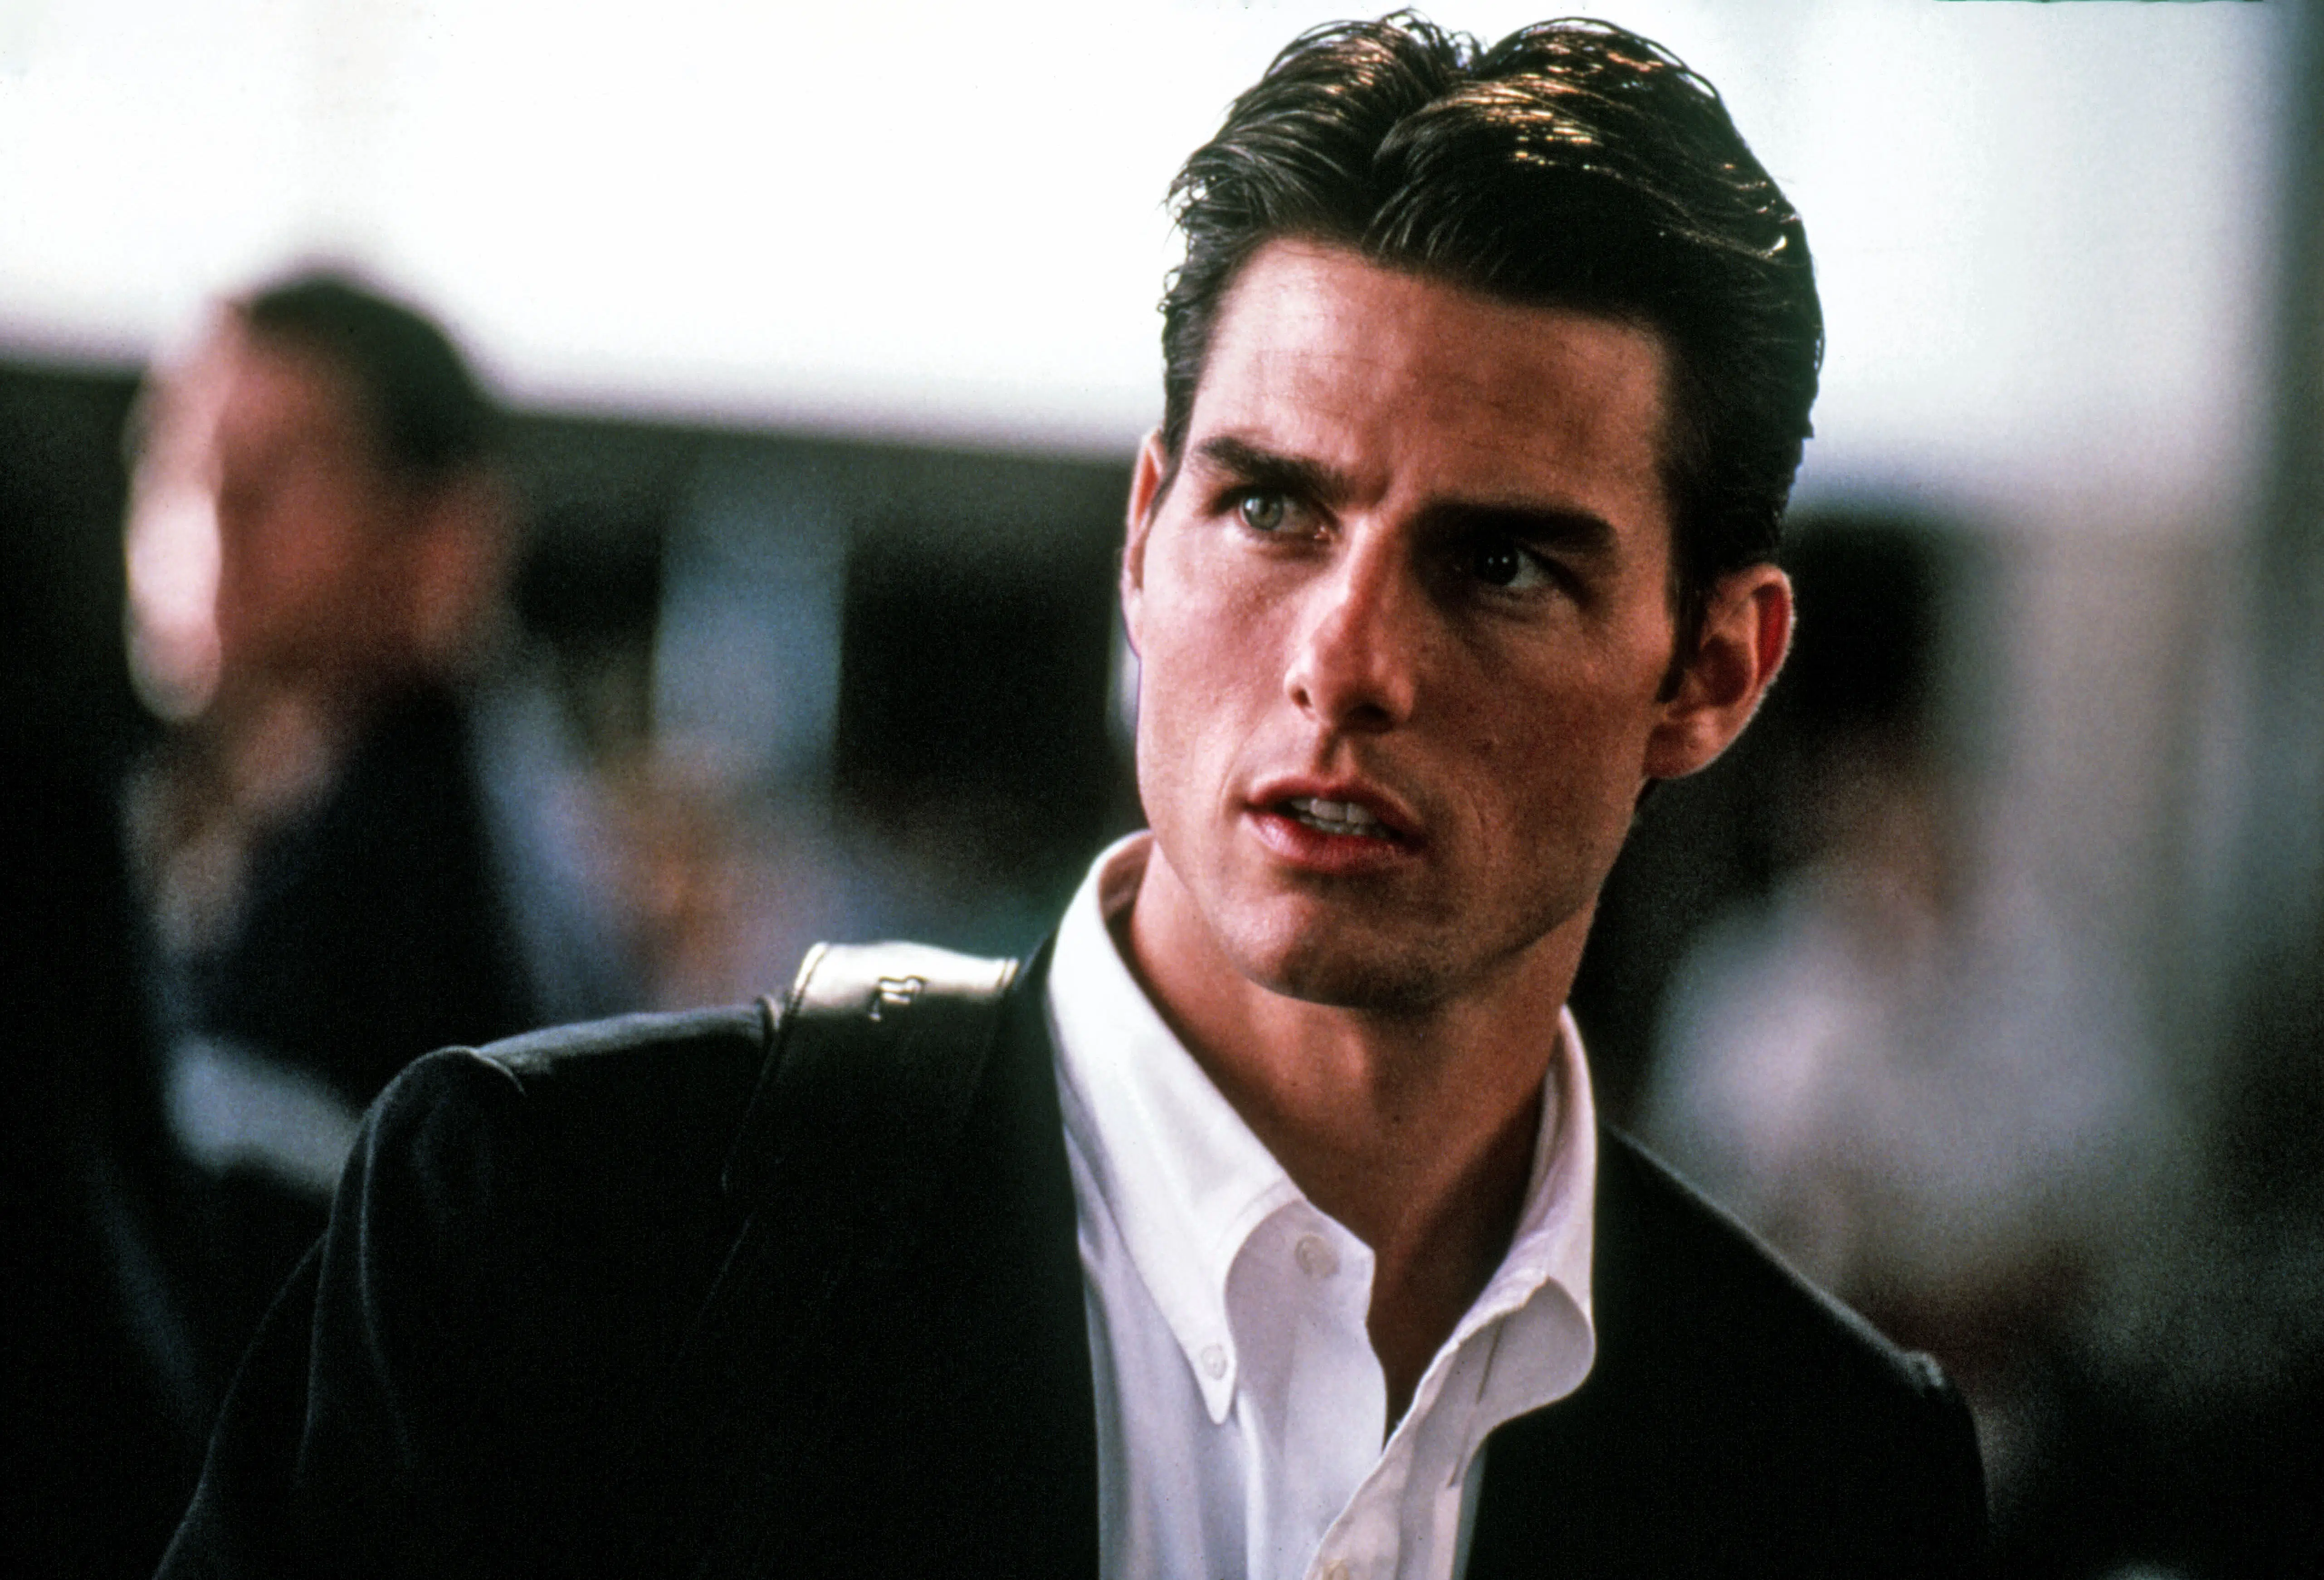 Tom Cruise in 'Jerry Maguire'